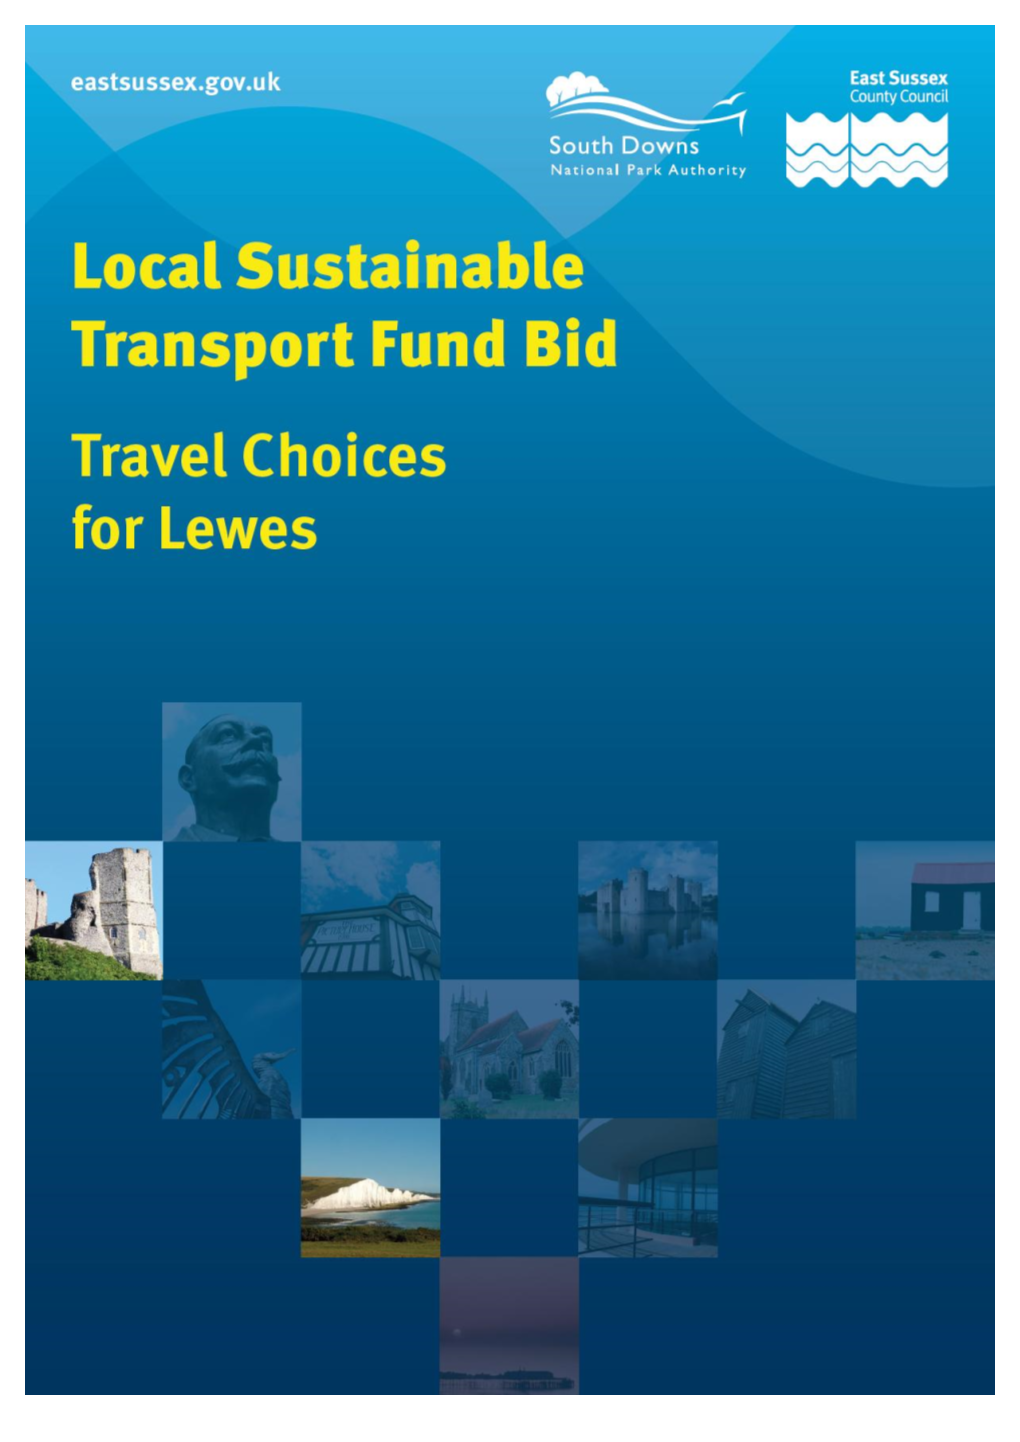 Lstf Travel Choices Lewes.Pdf